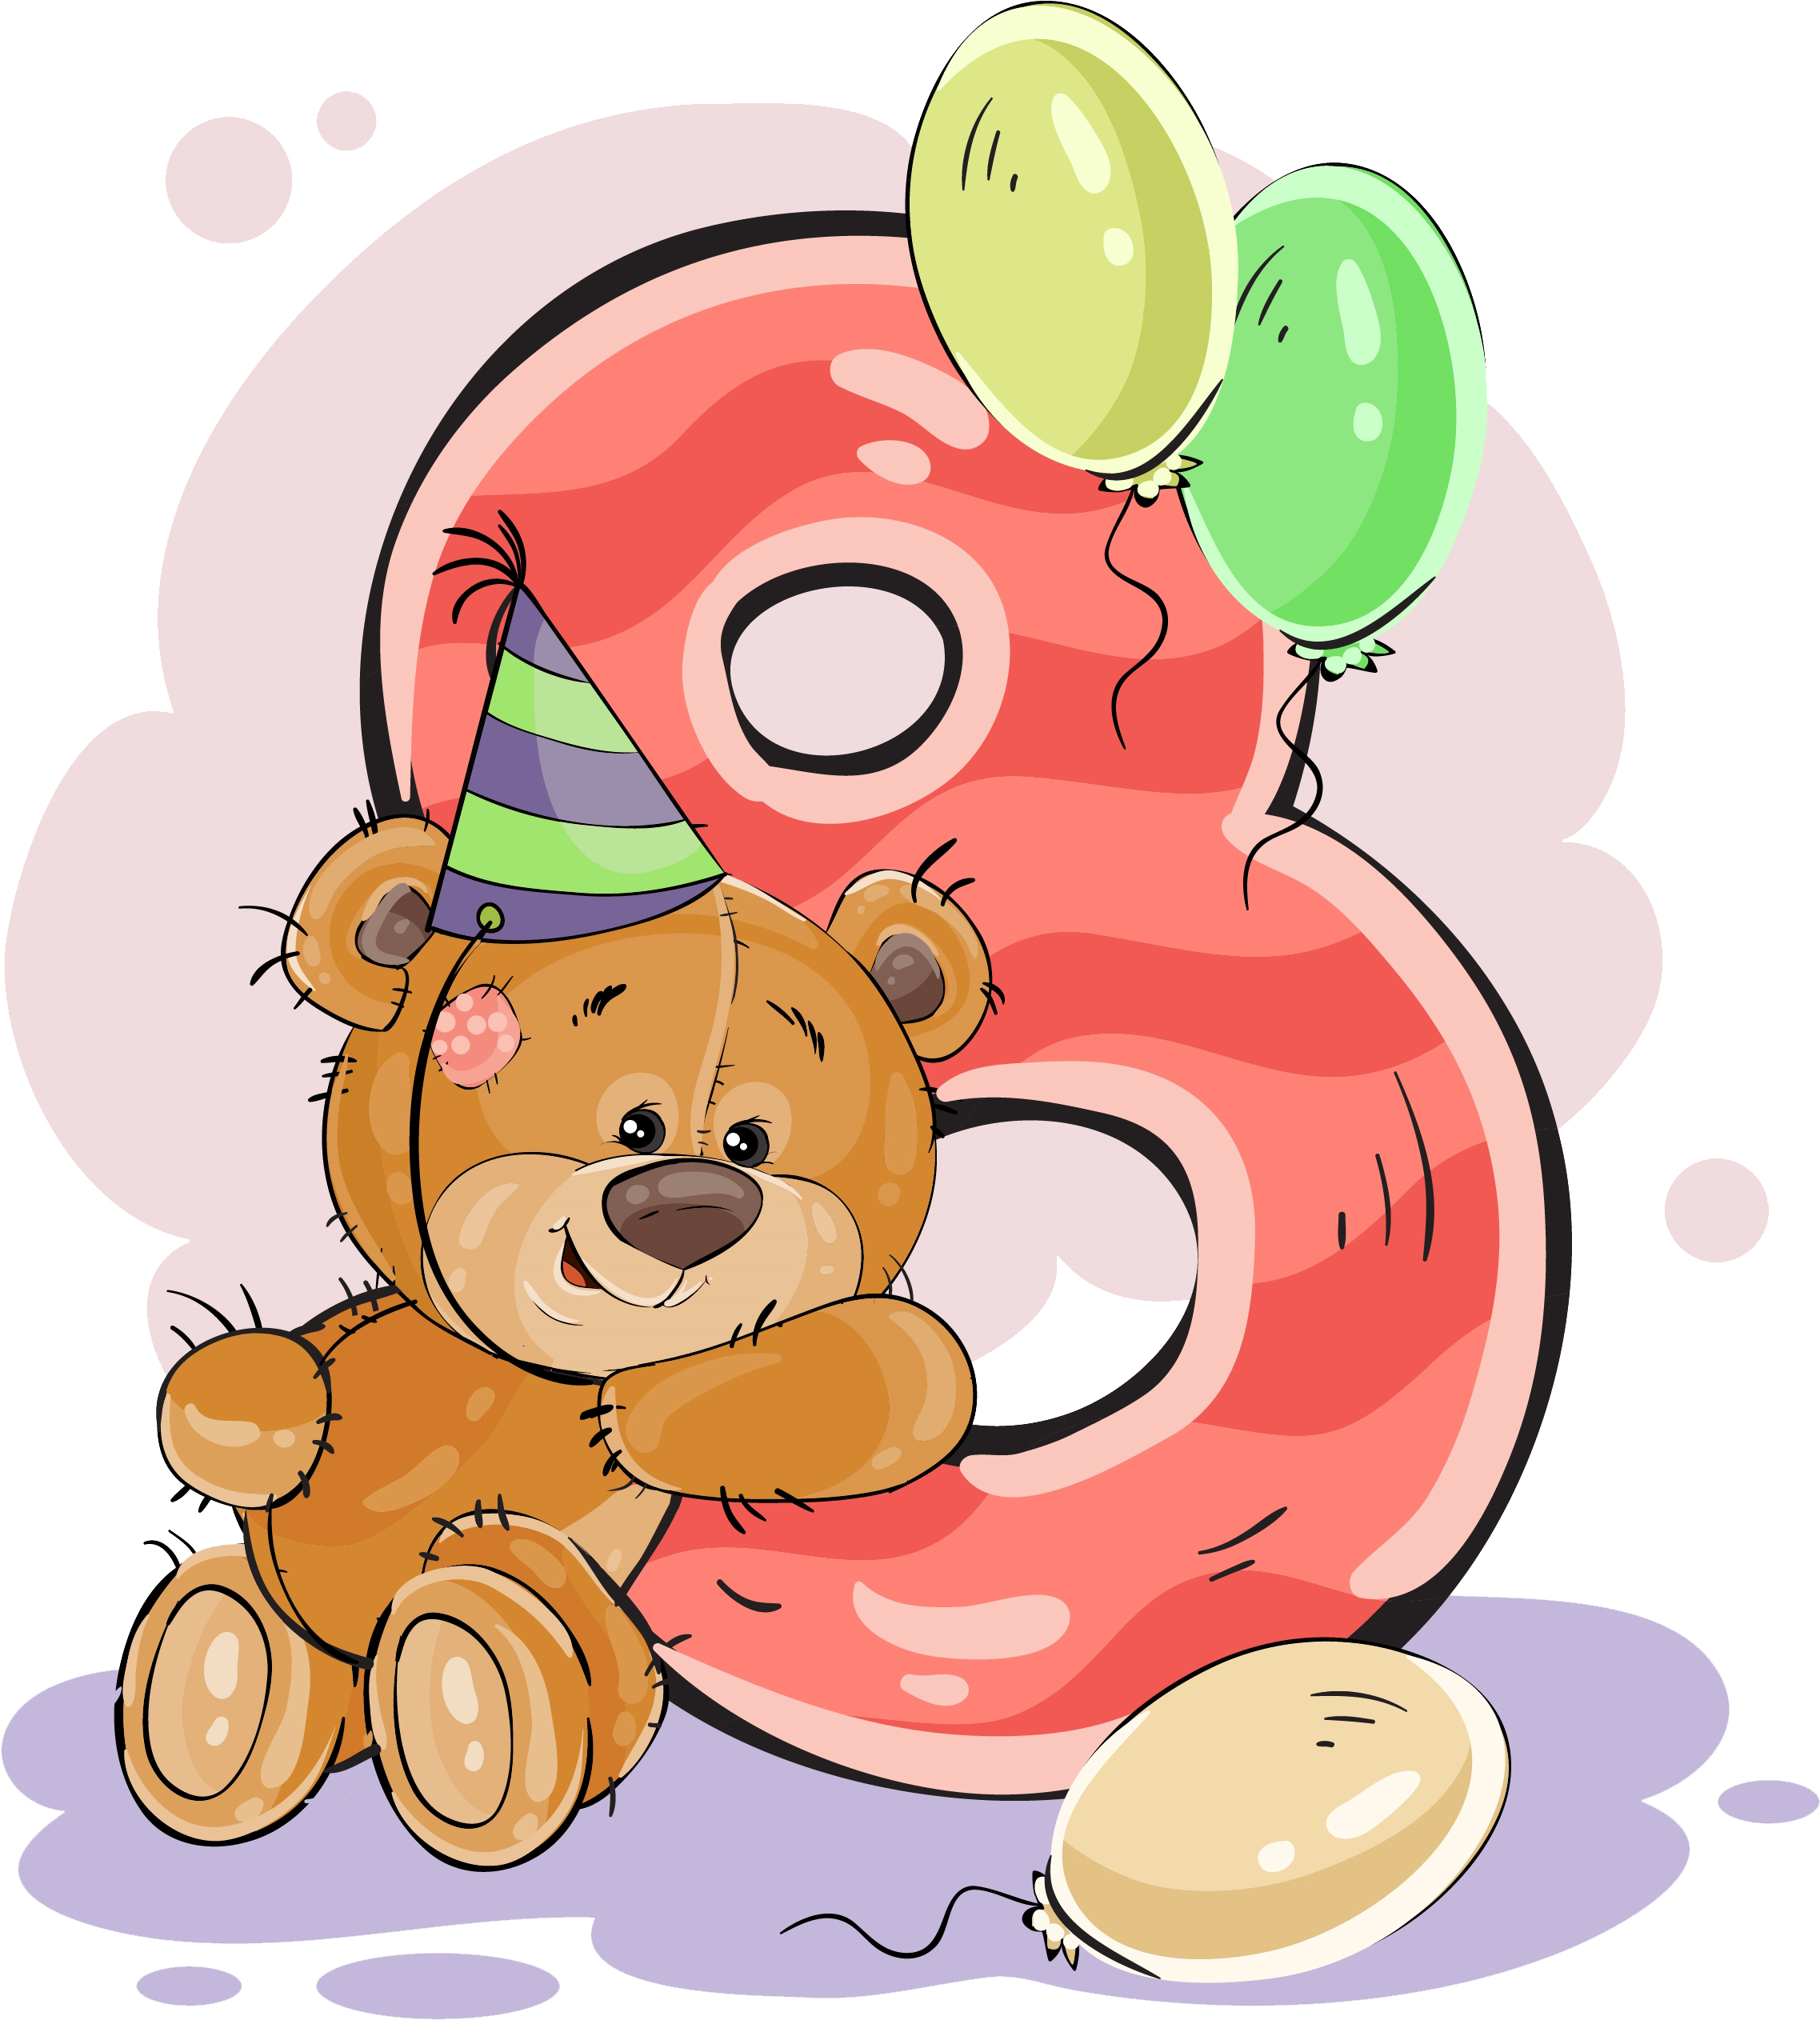 A Teddy Bear With A Hat And Balloons